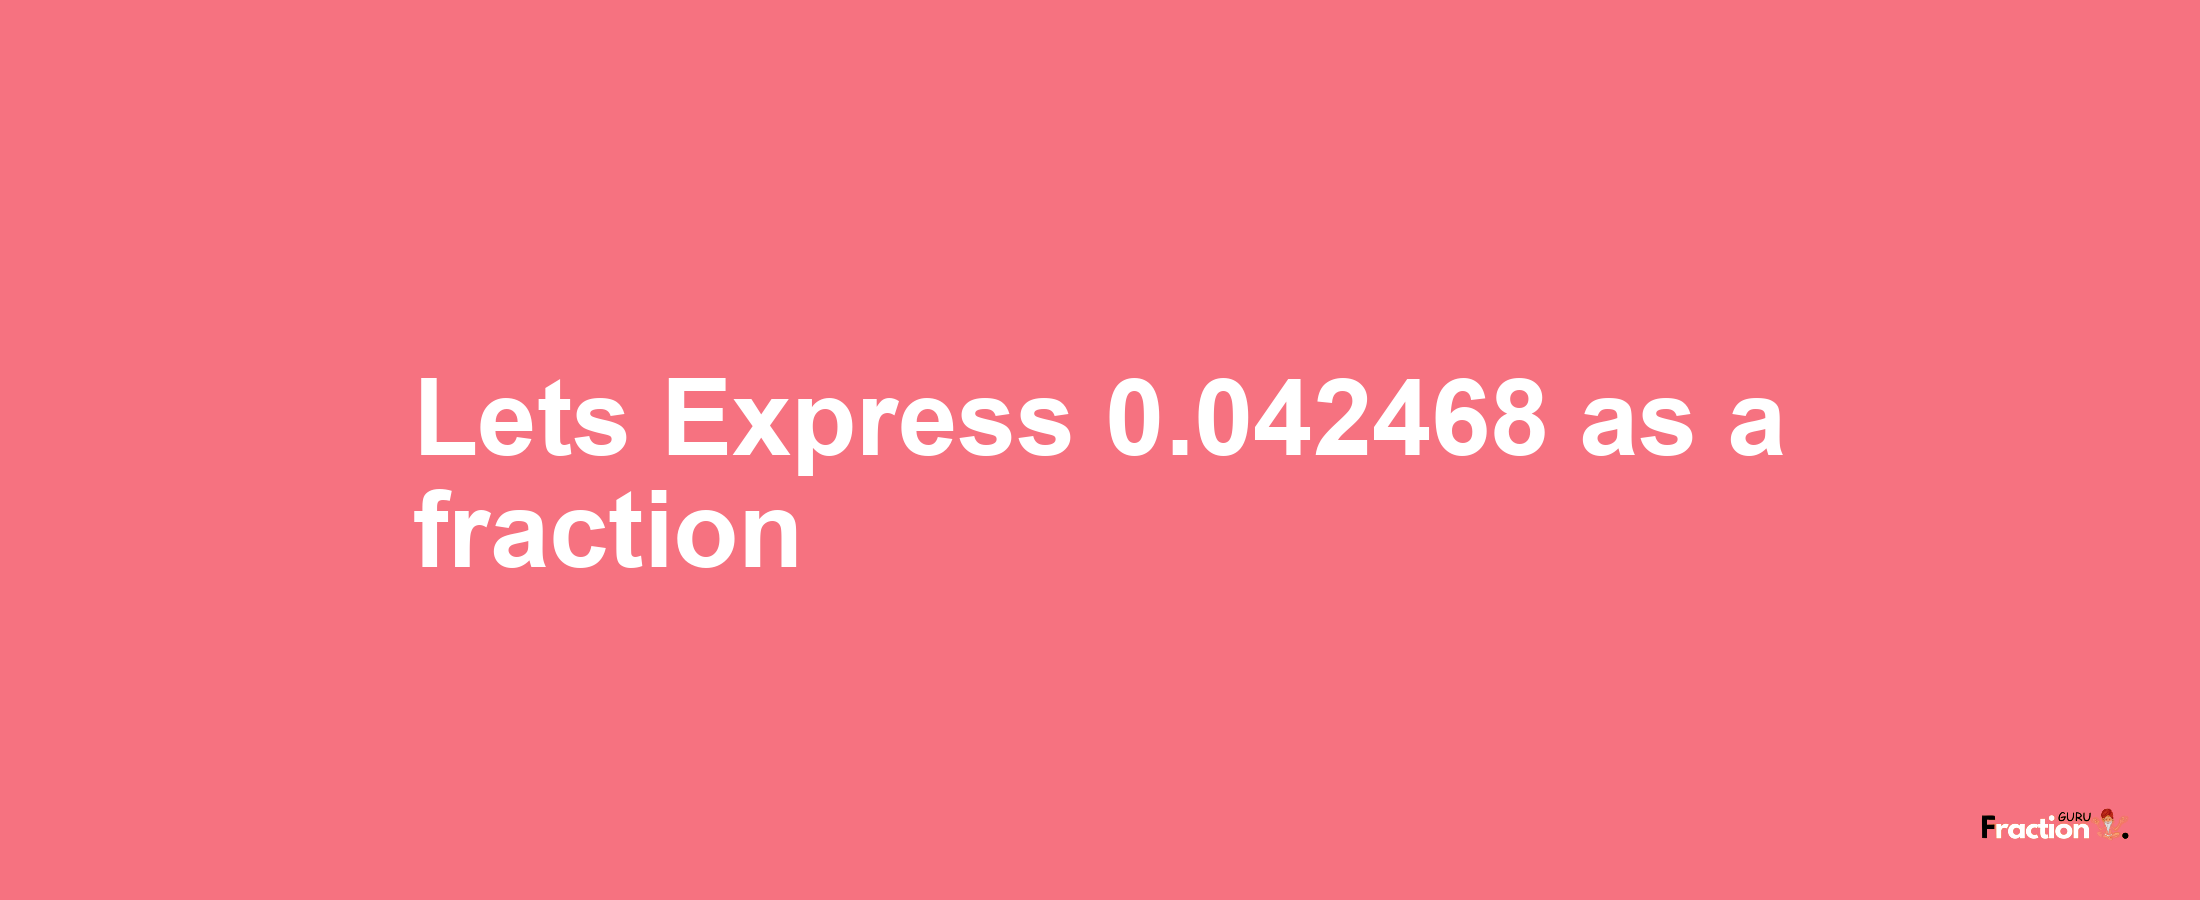 Lets Express 0.042468 as afraction